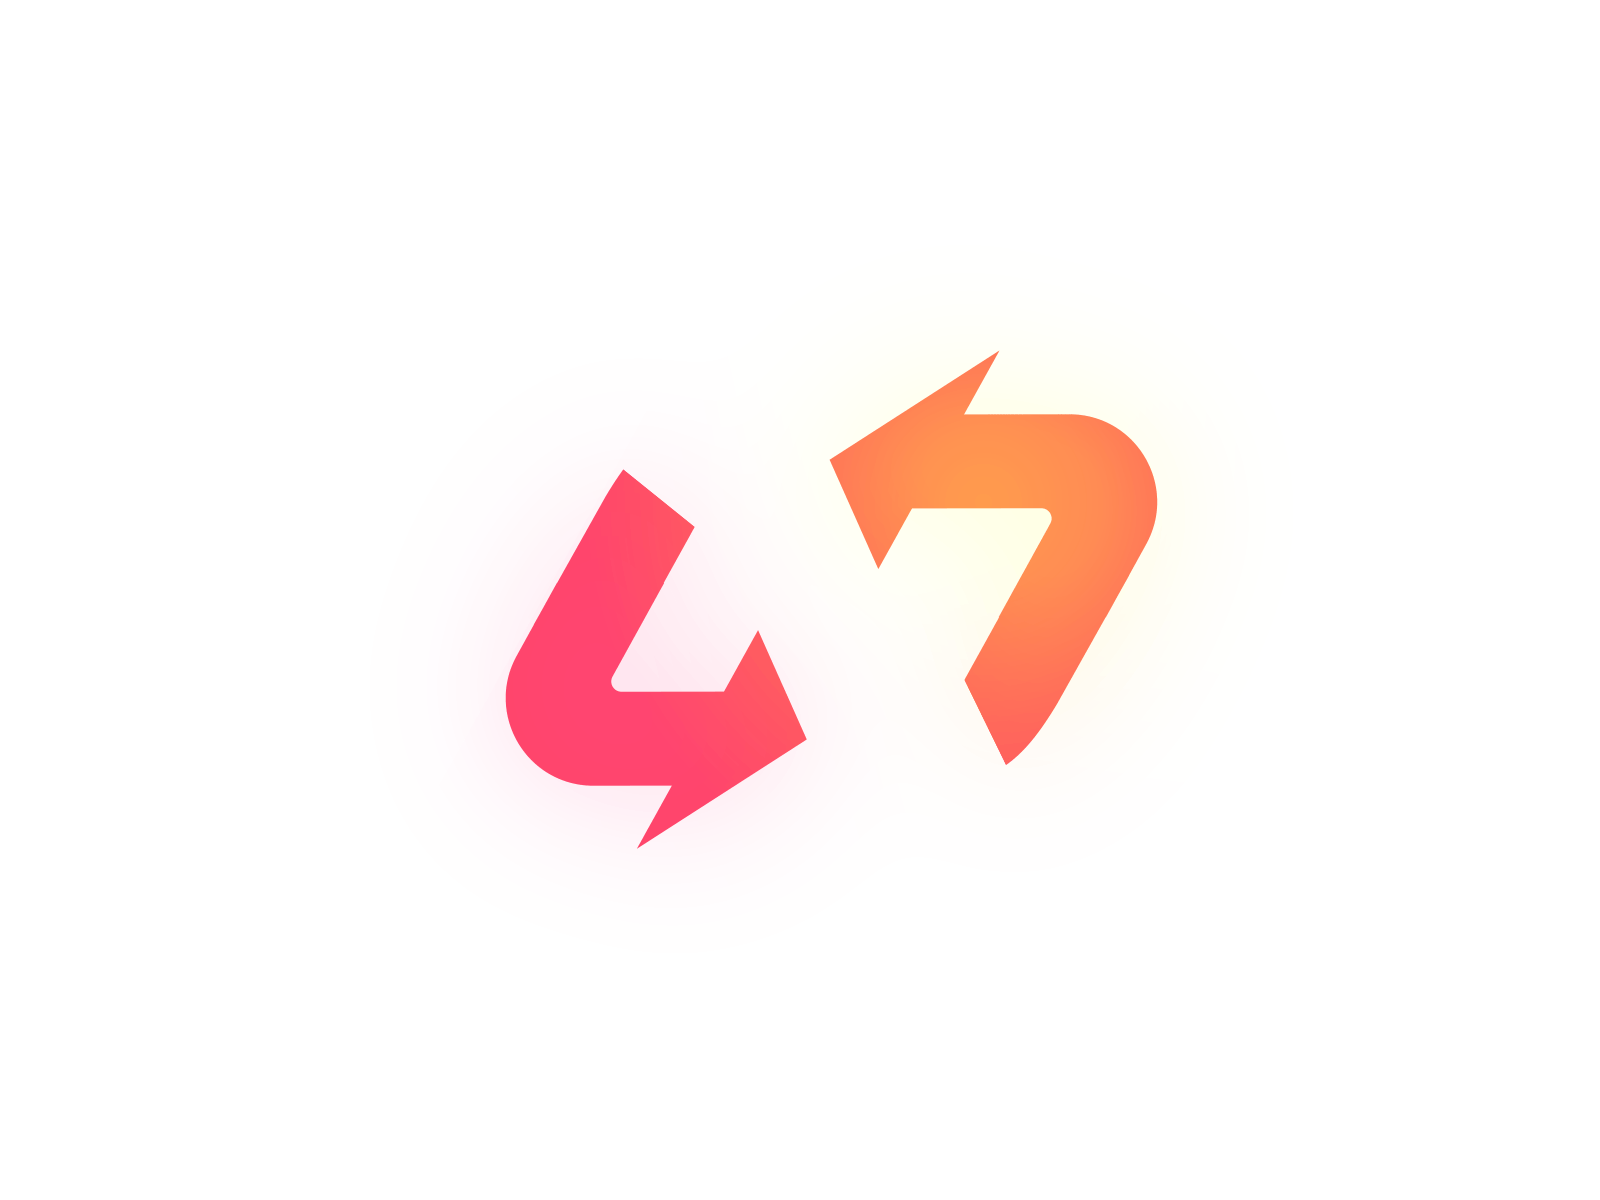 Zivmi - Logo Animation icon motion graphics motion design motion logo animation logo gif branding reveal logo reveal intro animated logo brand animation animation alexgoo after effects ae 2d animation 2d arrows